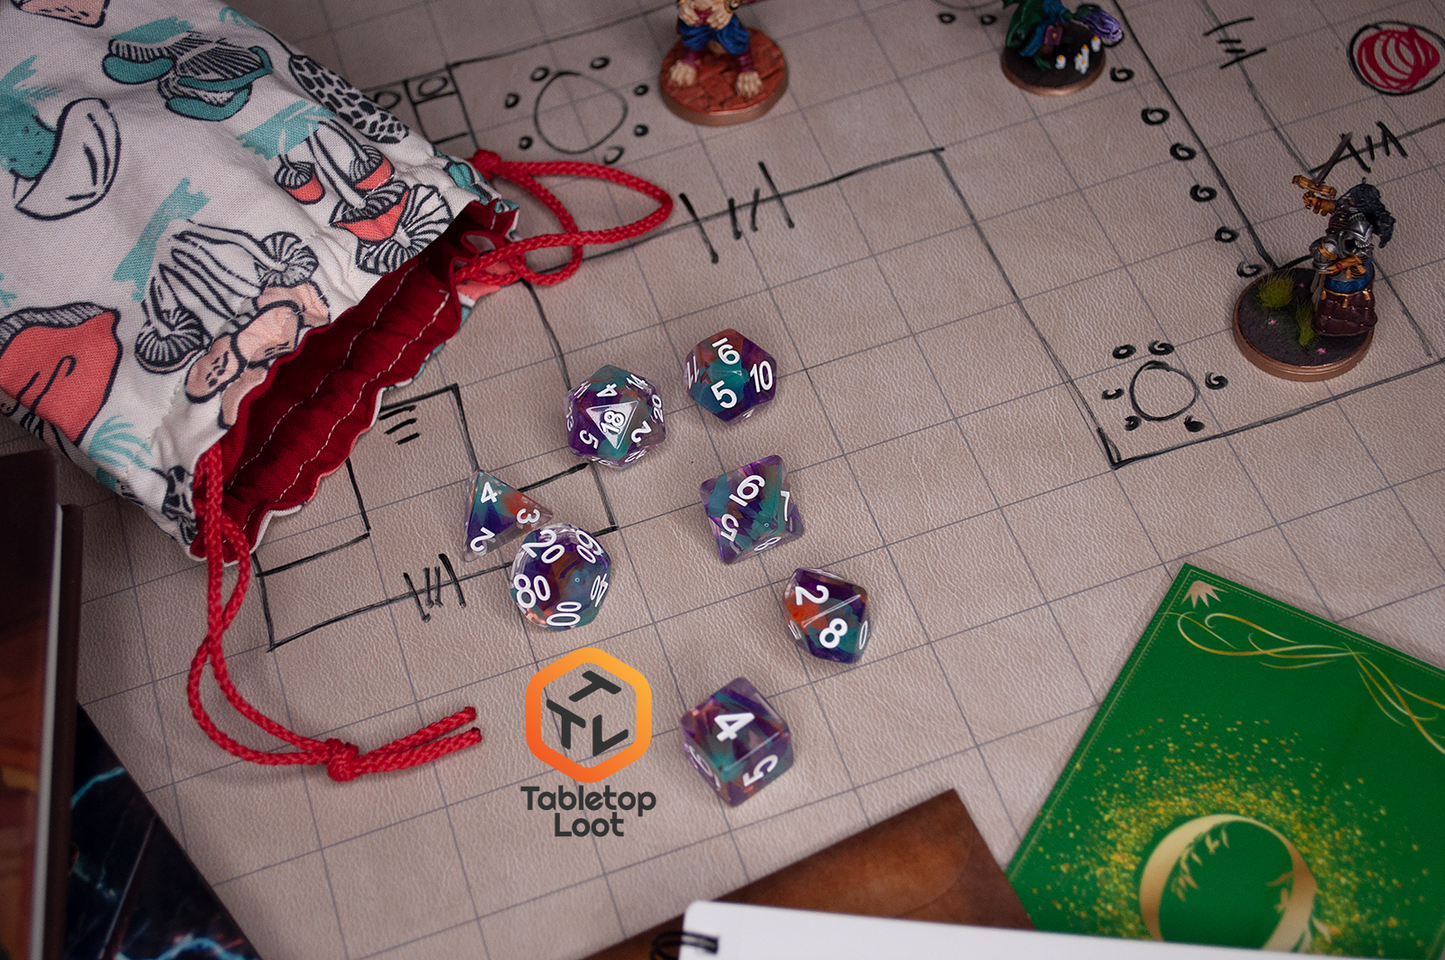 A 7 piece set of Raise the Banners dice; orange, blue, and purple swirls in clear resin.